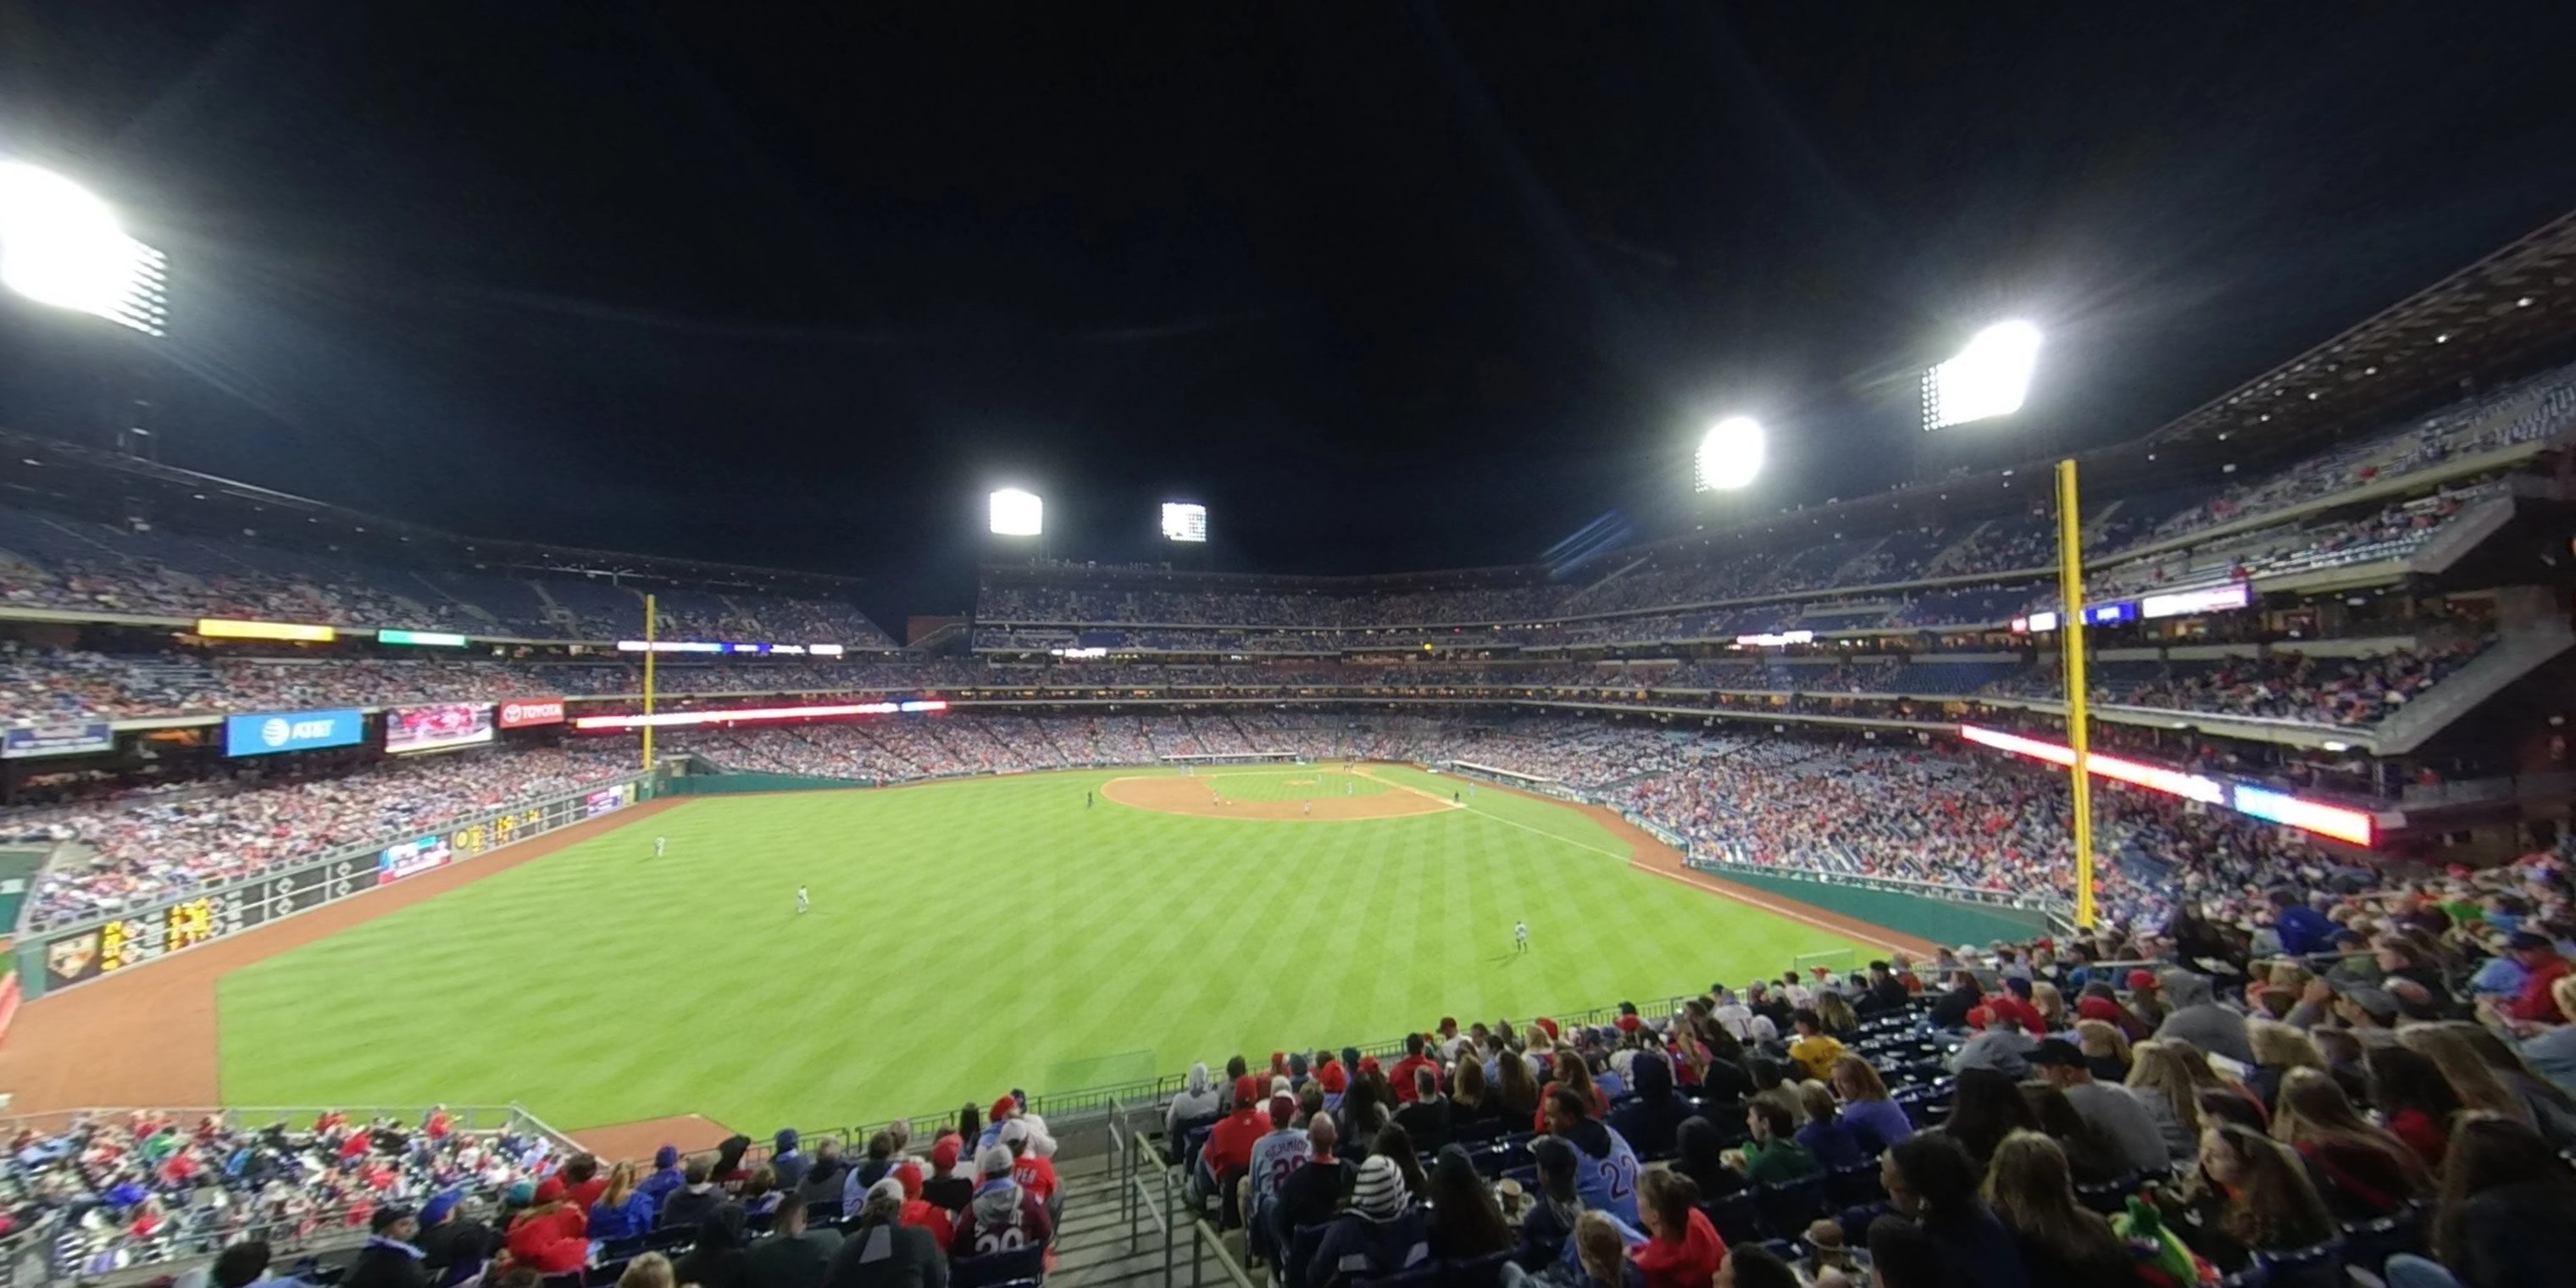 section 244 panoramic seat view  for baseball - citizens bank park